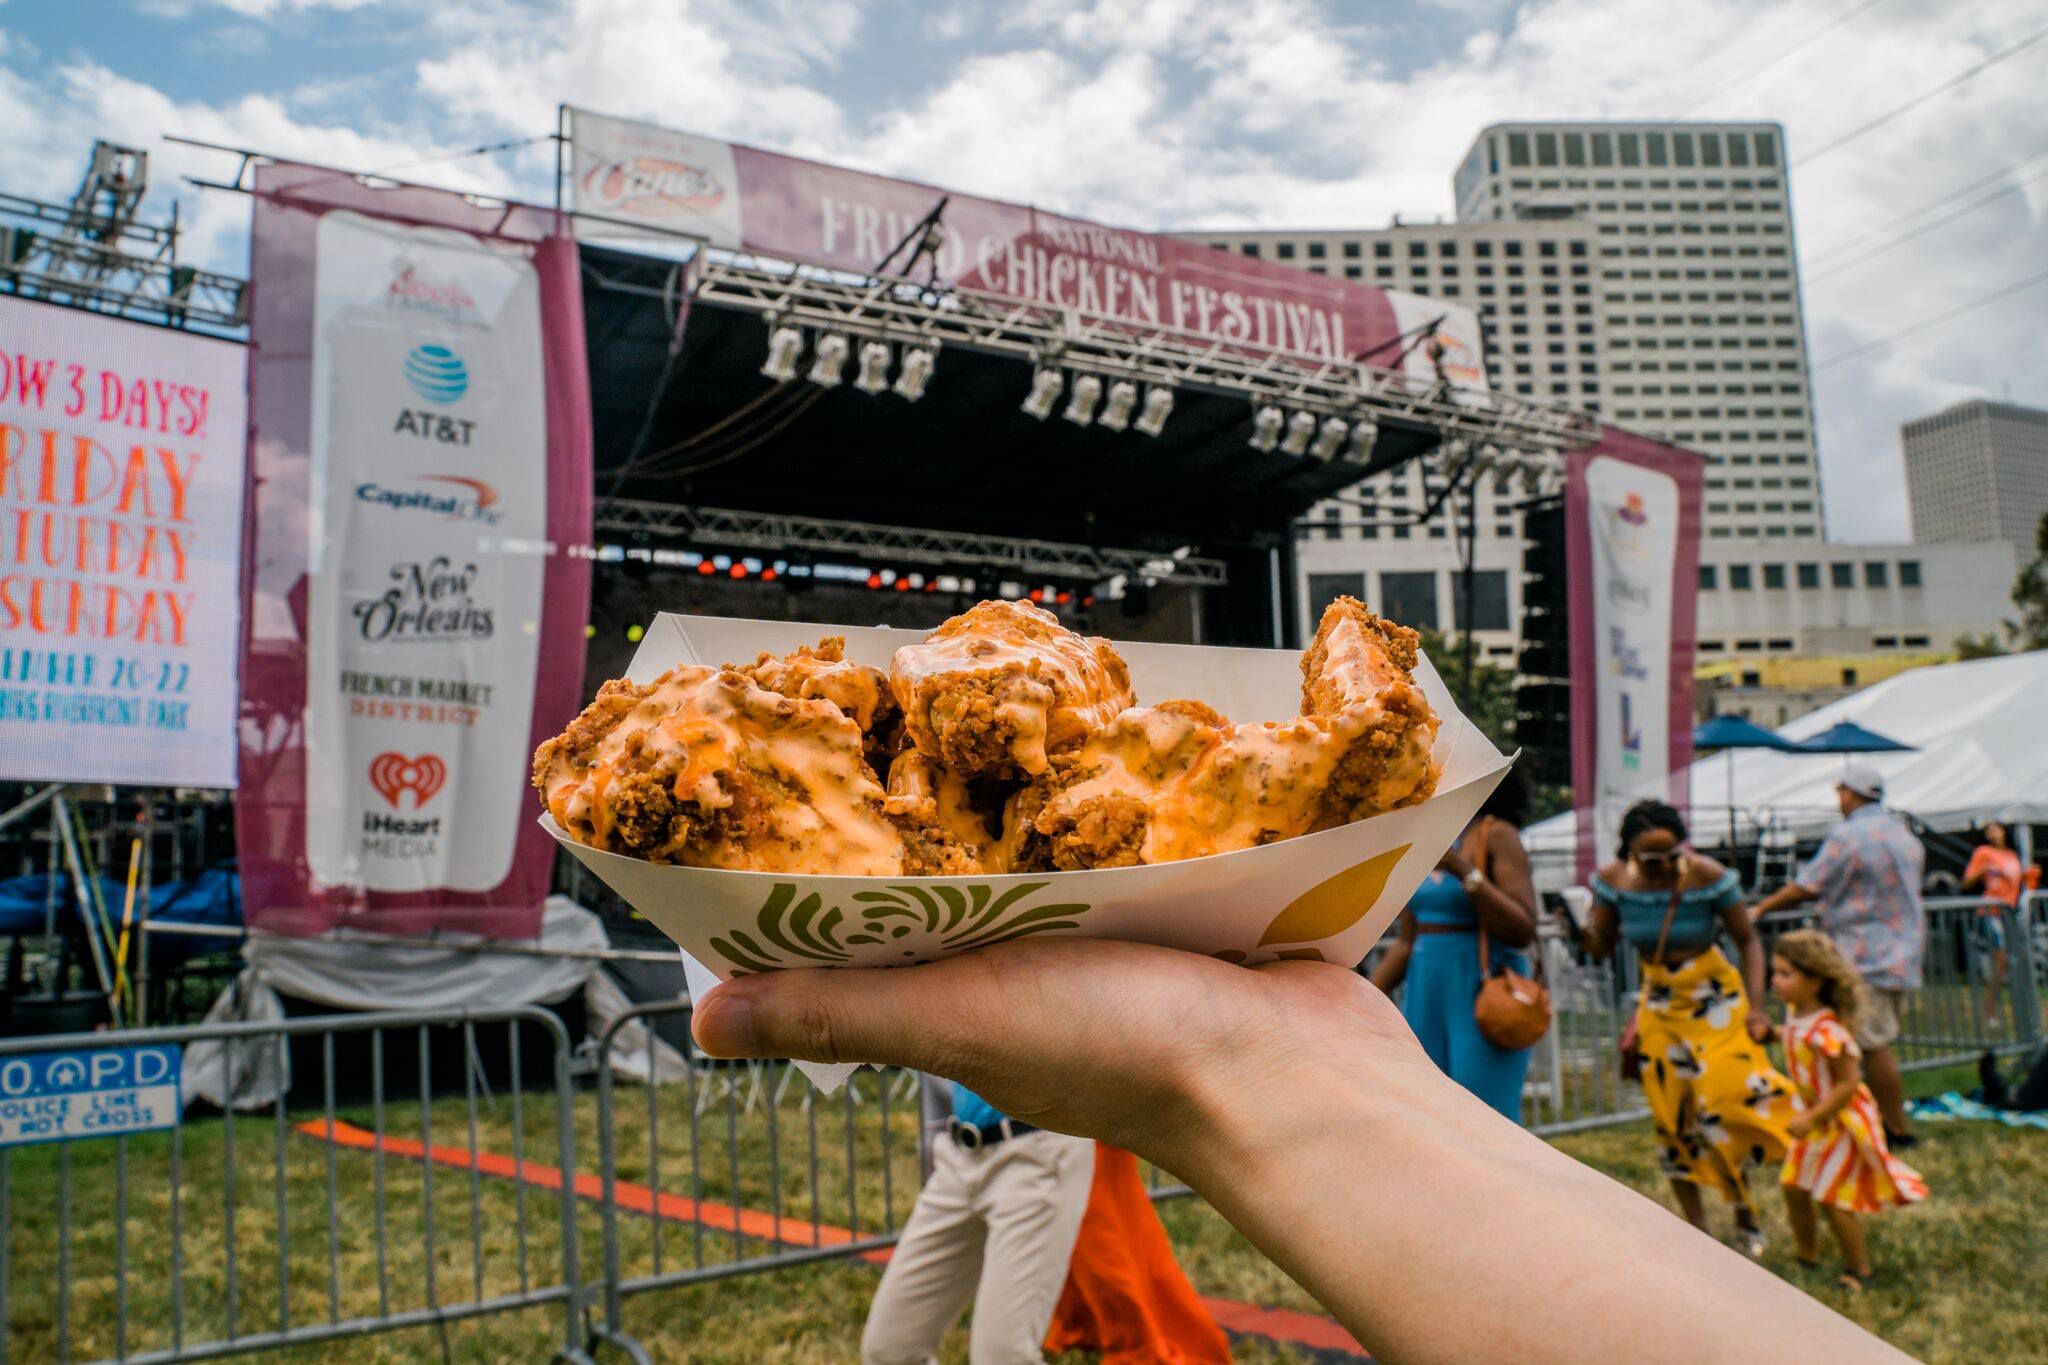 16 Facts About National Fried Chicken Festival